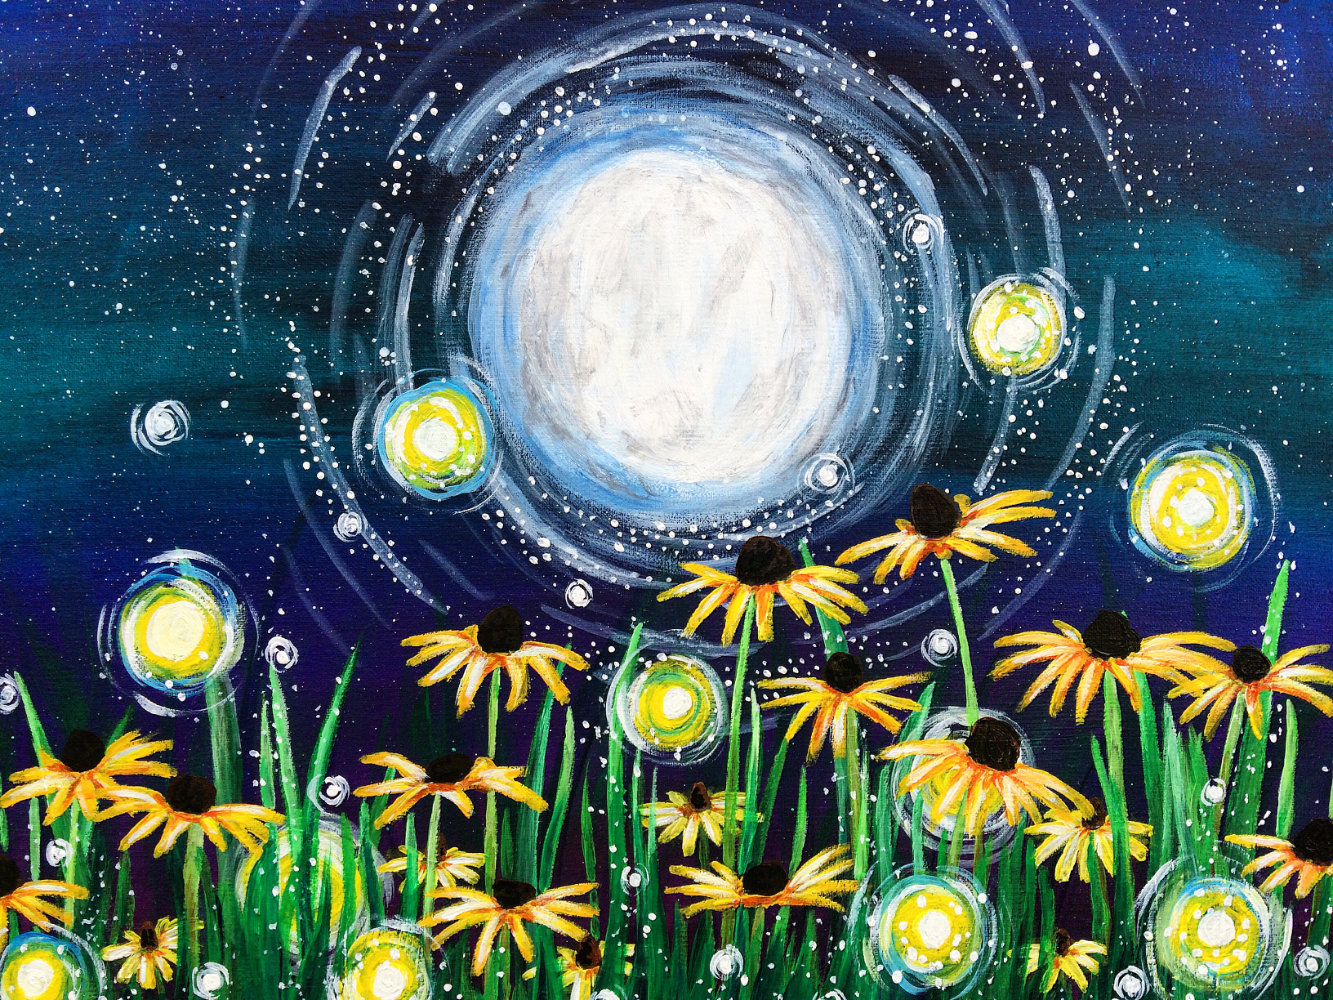 Whimsical daisy field painting with full moon